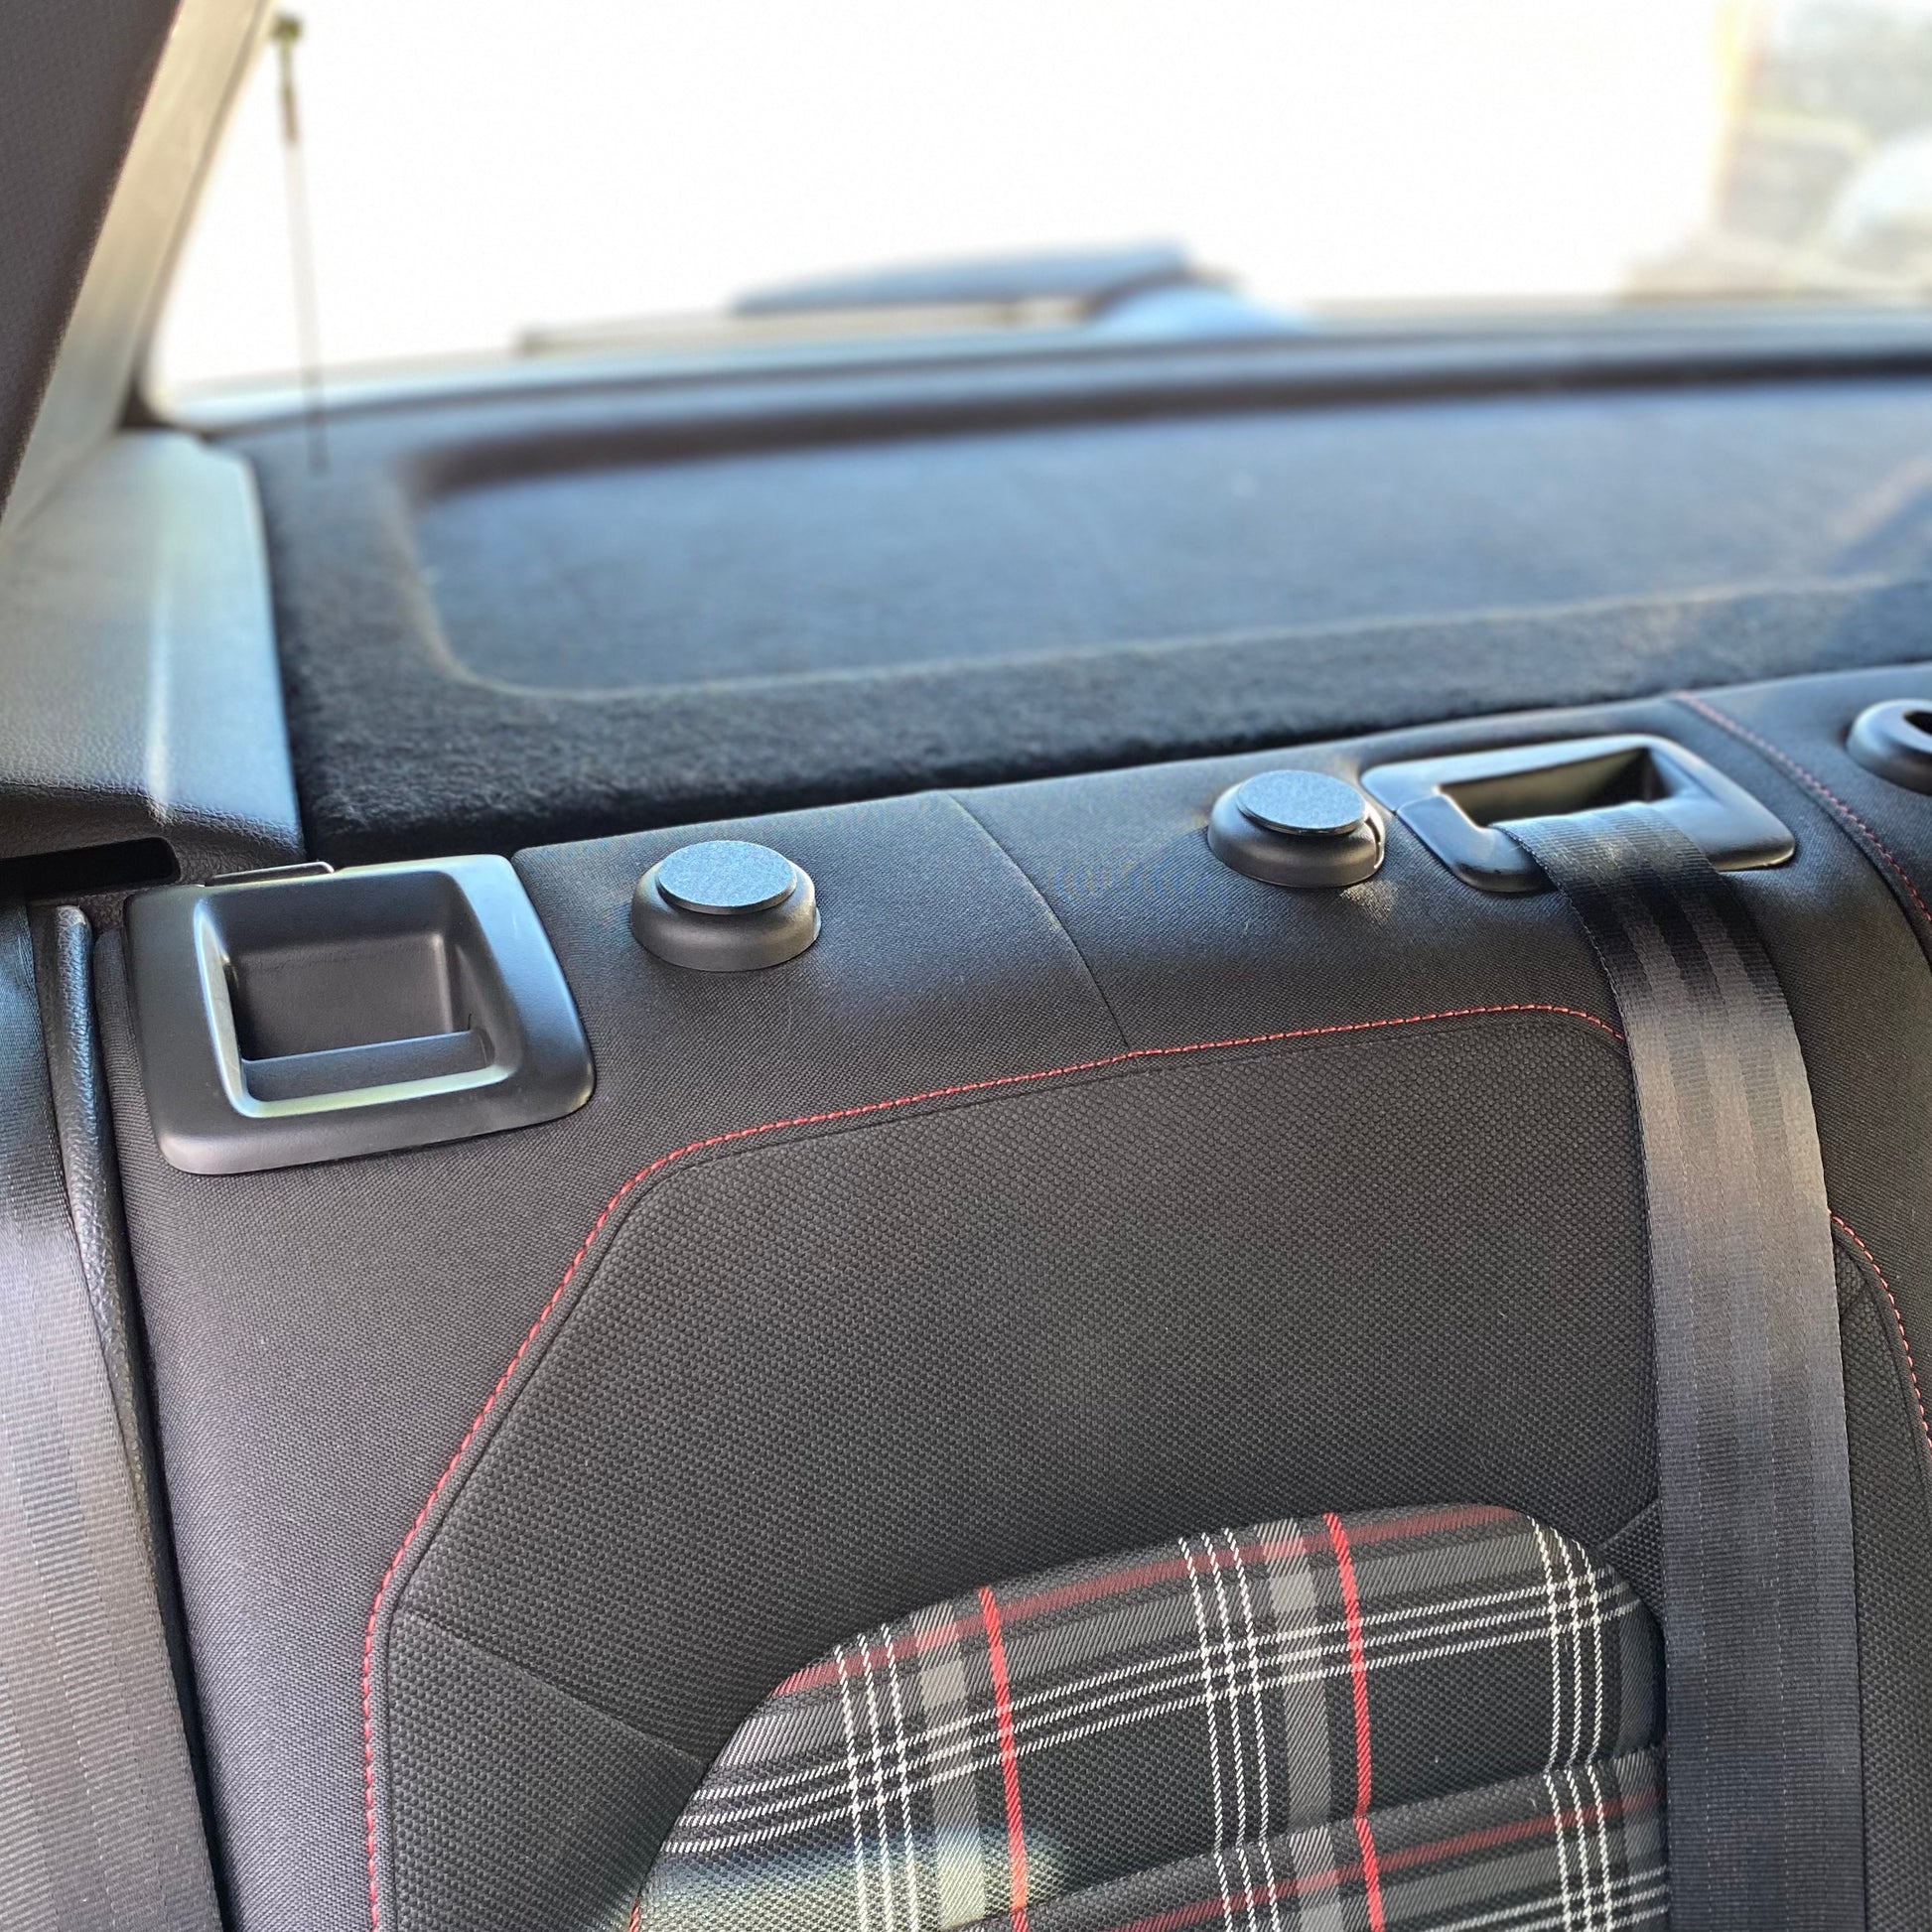 OEM Replacement Car Headrests, Used Car Headrests